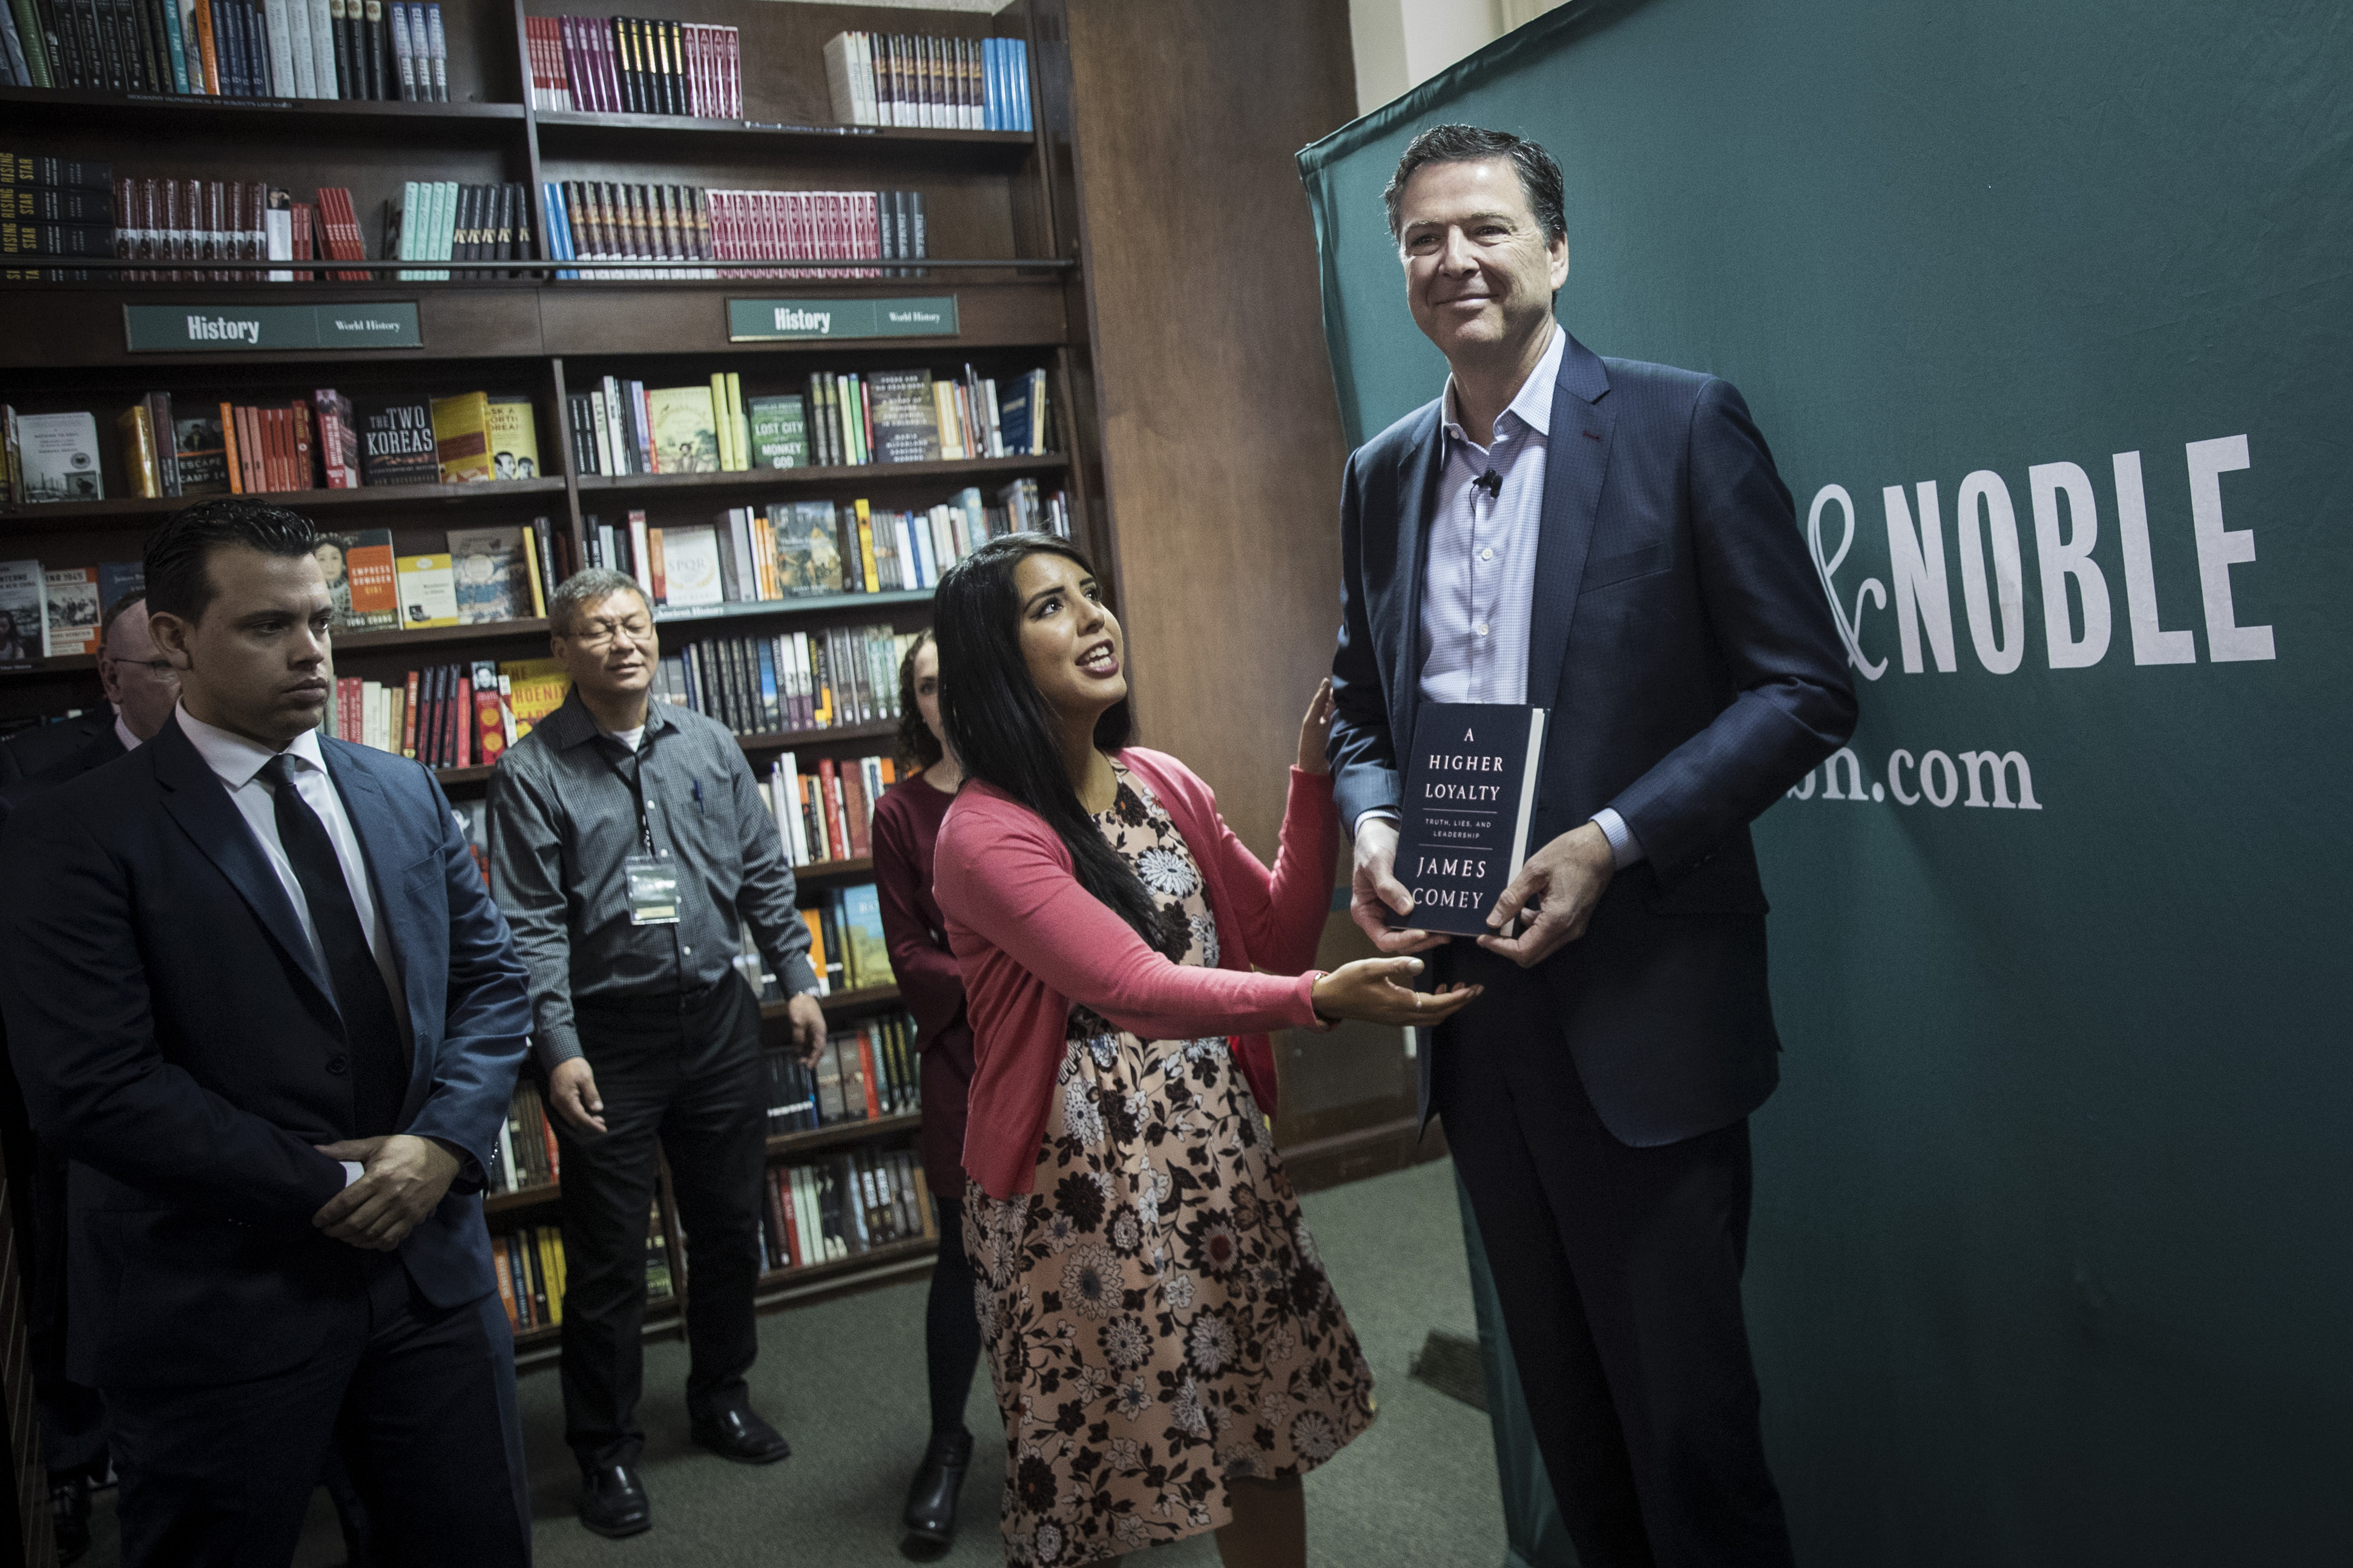 NEW YORK, NY - APRIL 18: Former FBI Director James Comey poses for photographs as he arrives to speak about his new book "A Higher Loyalty: Truth, Lies, and Leadership" at Barnes & Noble bookstore, April 18, 2018 in New York City. The book, which went on sale yesterday, focuses on leadership principles and details his interactions with President Donald Trump. Comey served as FBI Director from September 2013 until May 2017, when he was fired by the president. Comey previously served as U.S. Deputy Attorney General and U.S. Attorney for the Southern District of New York. (Photo by Drew Angerer/Getty Images)